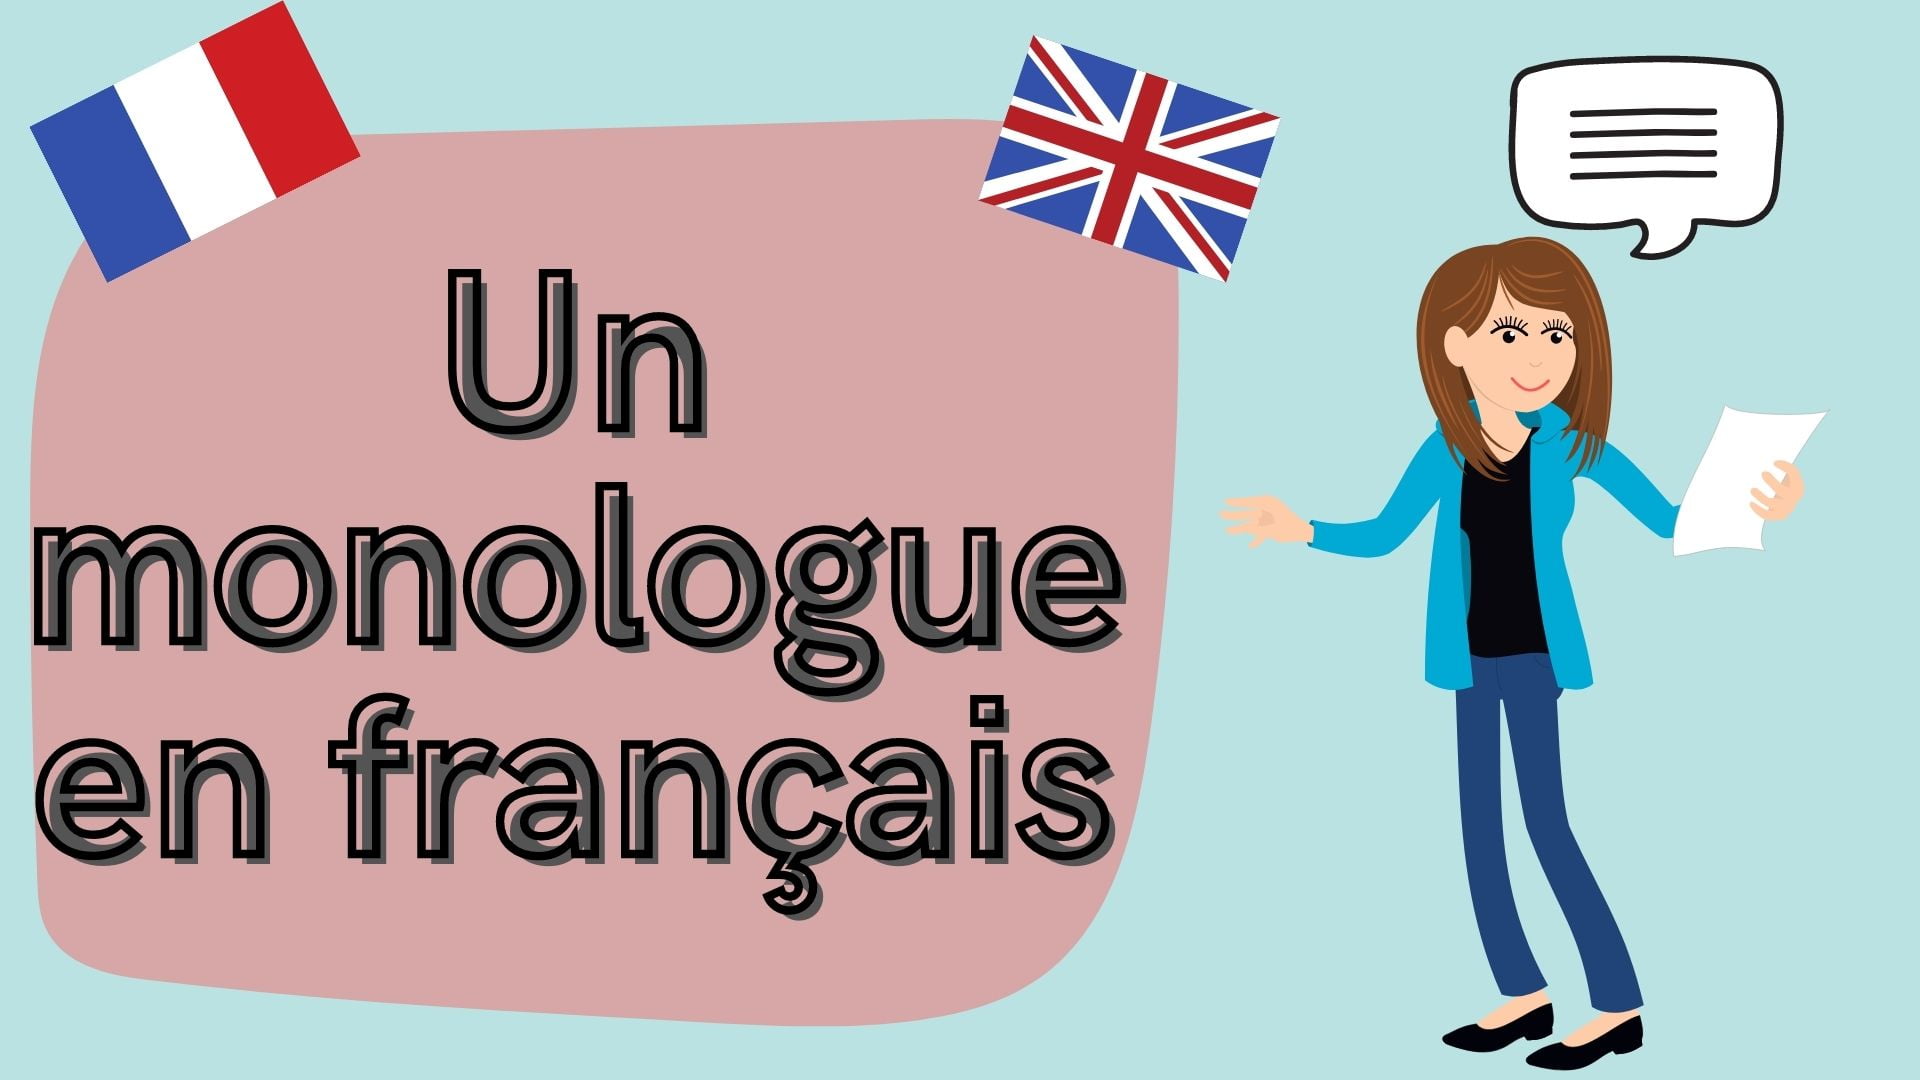 Tips for a monologue in French